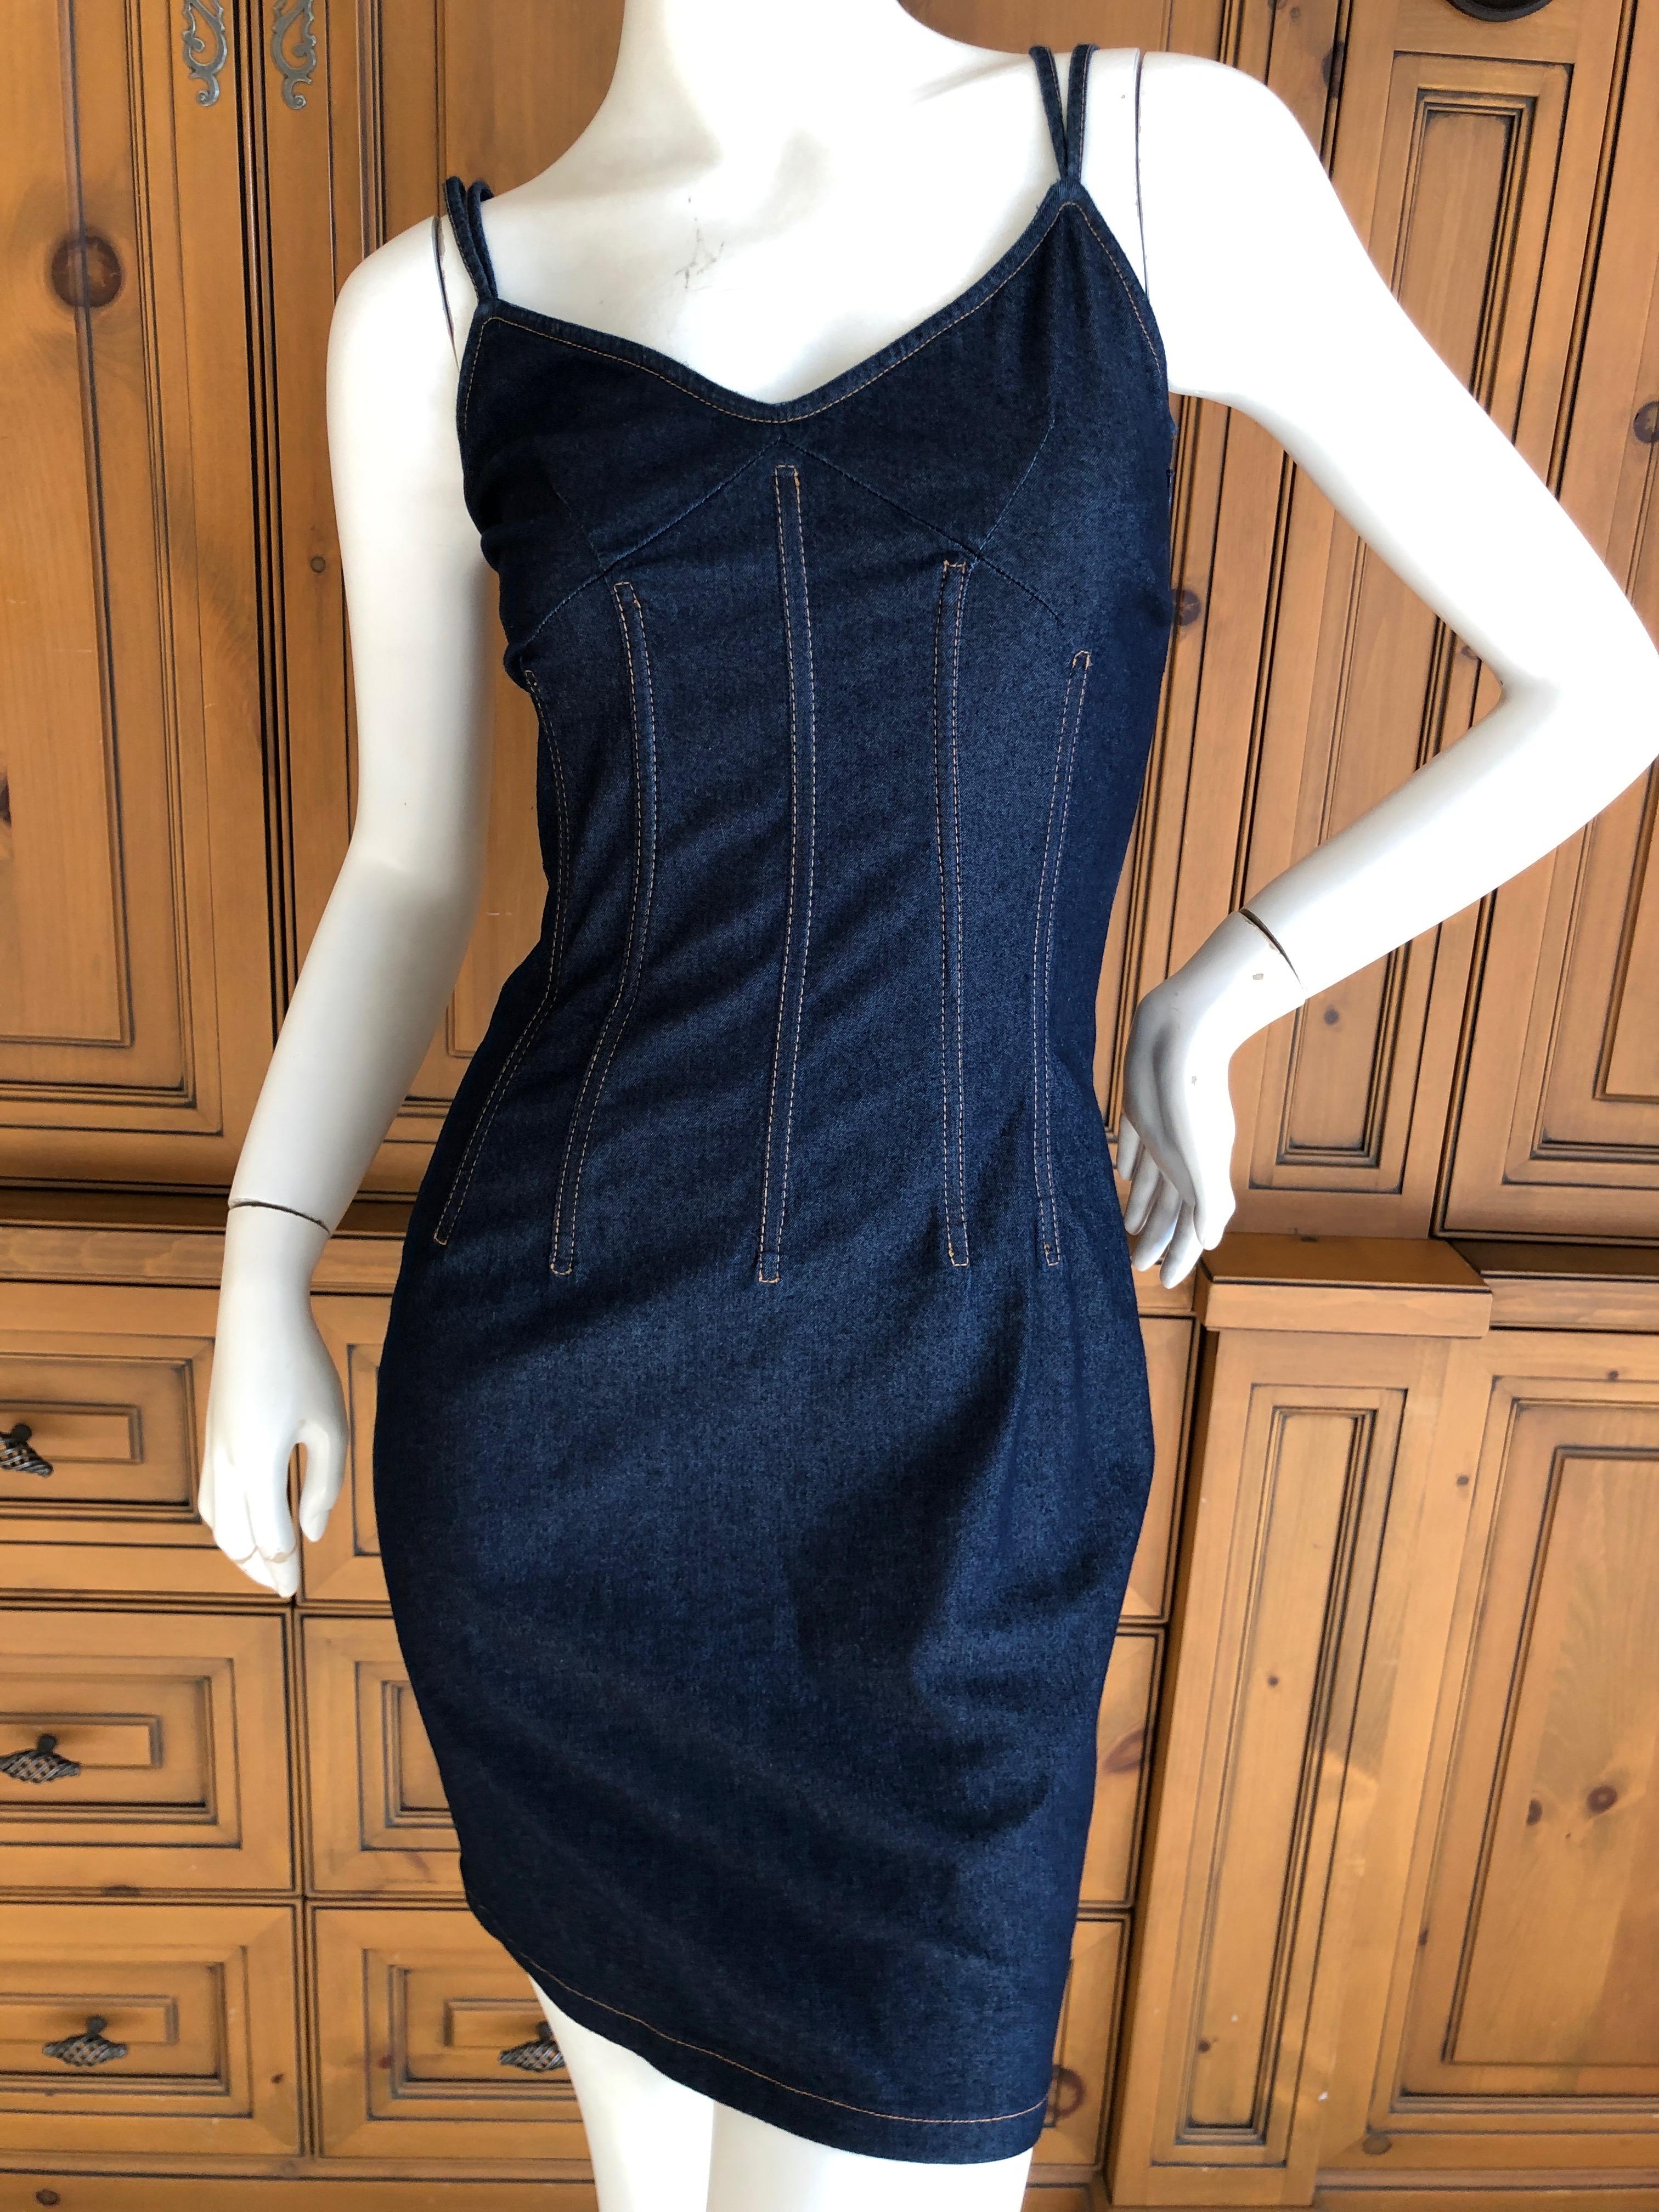 D&G Dolce & Gabbana Sexy Vintage Dark Denim Corset Dress with Lace Up Back.
There are corset stays in the dress, and it laces up , corset style up the back
Size 42, runs small
Lots of stretch
 Bust 36'
Waist 26